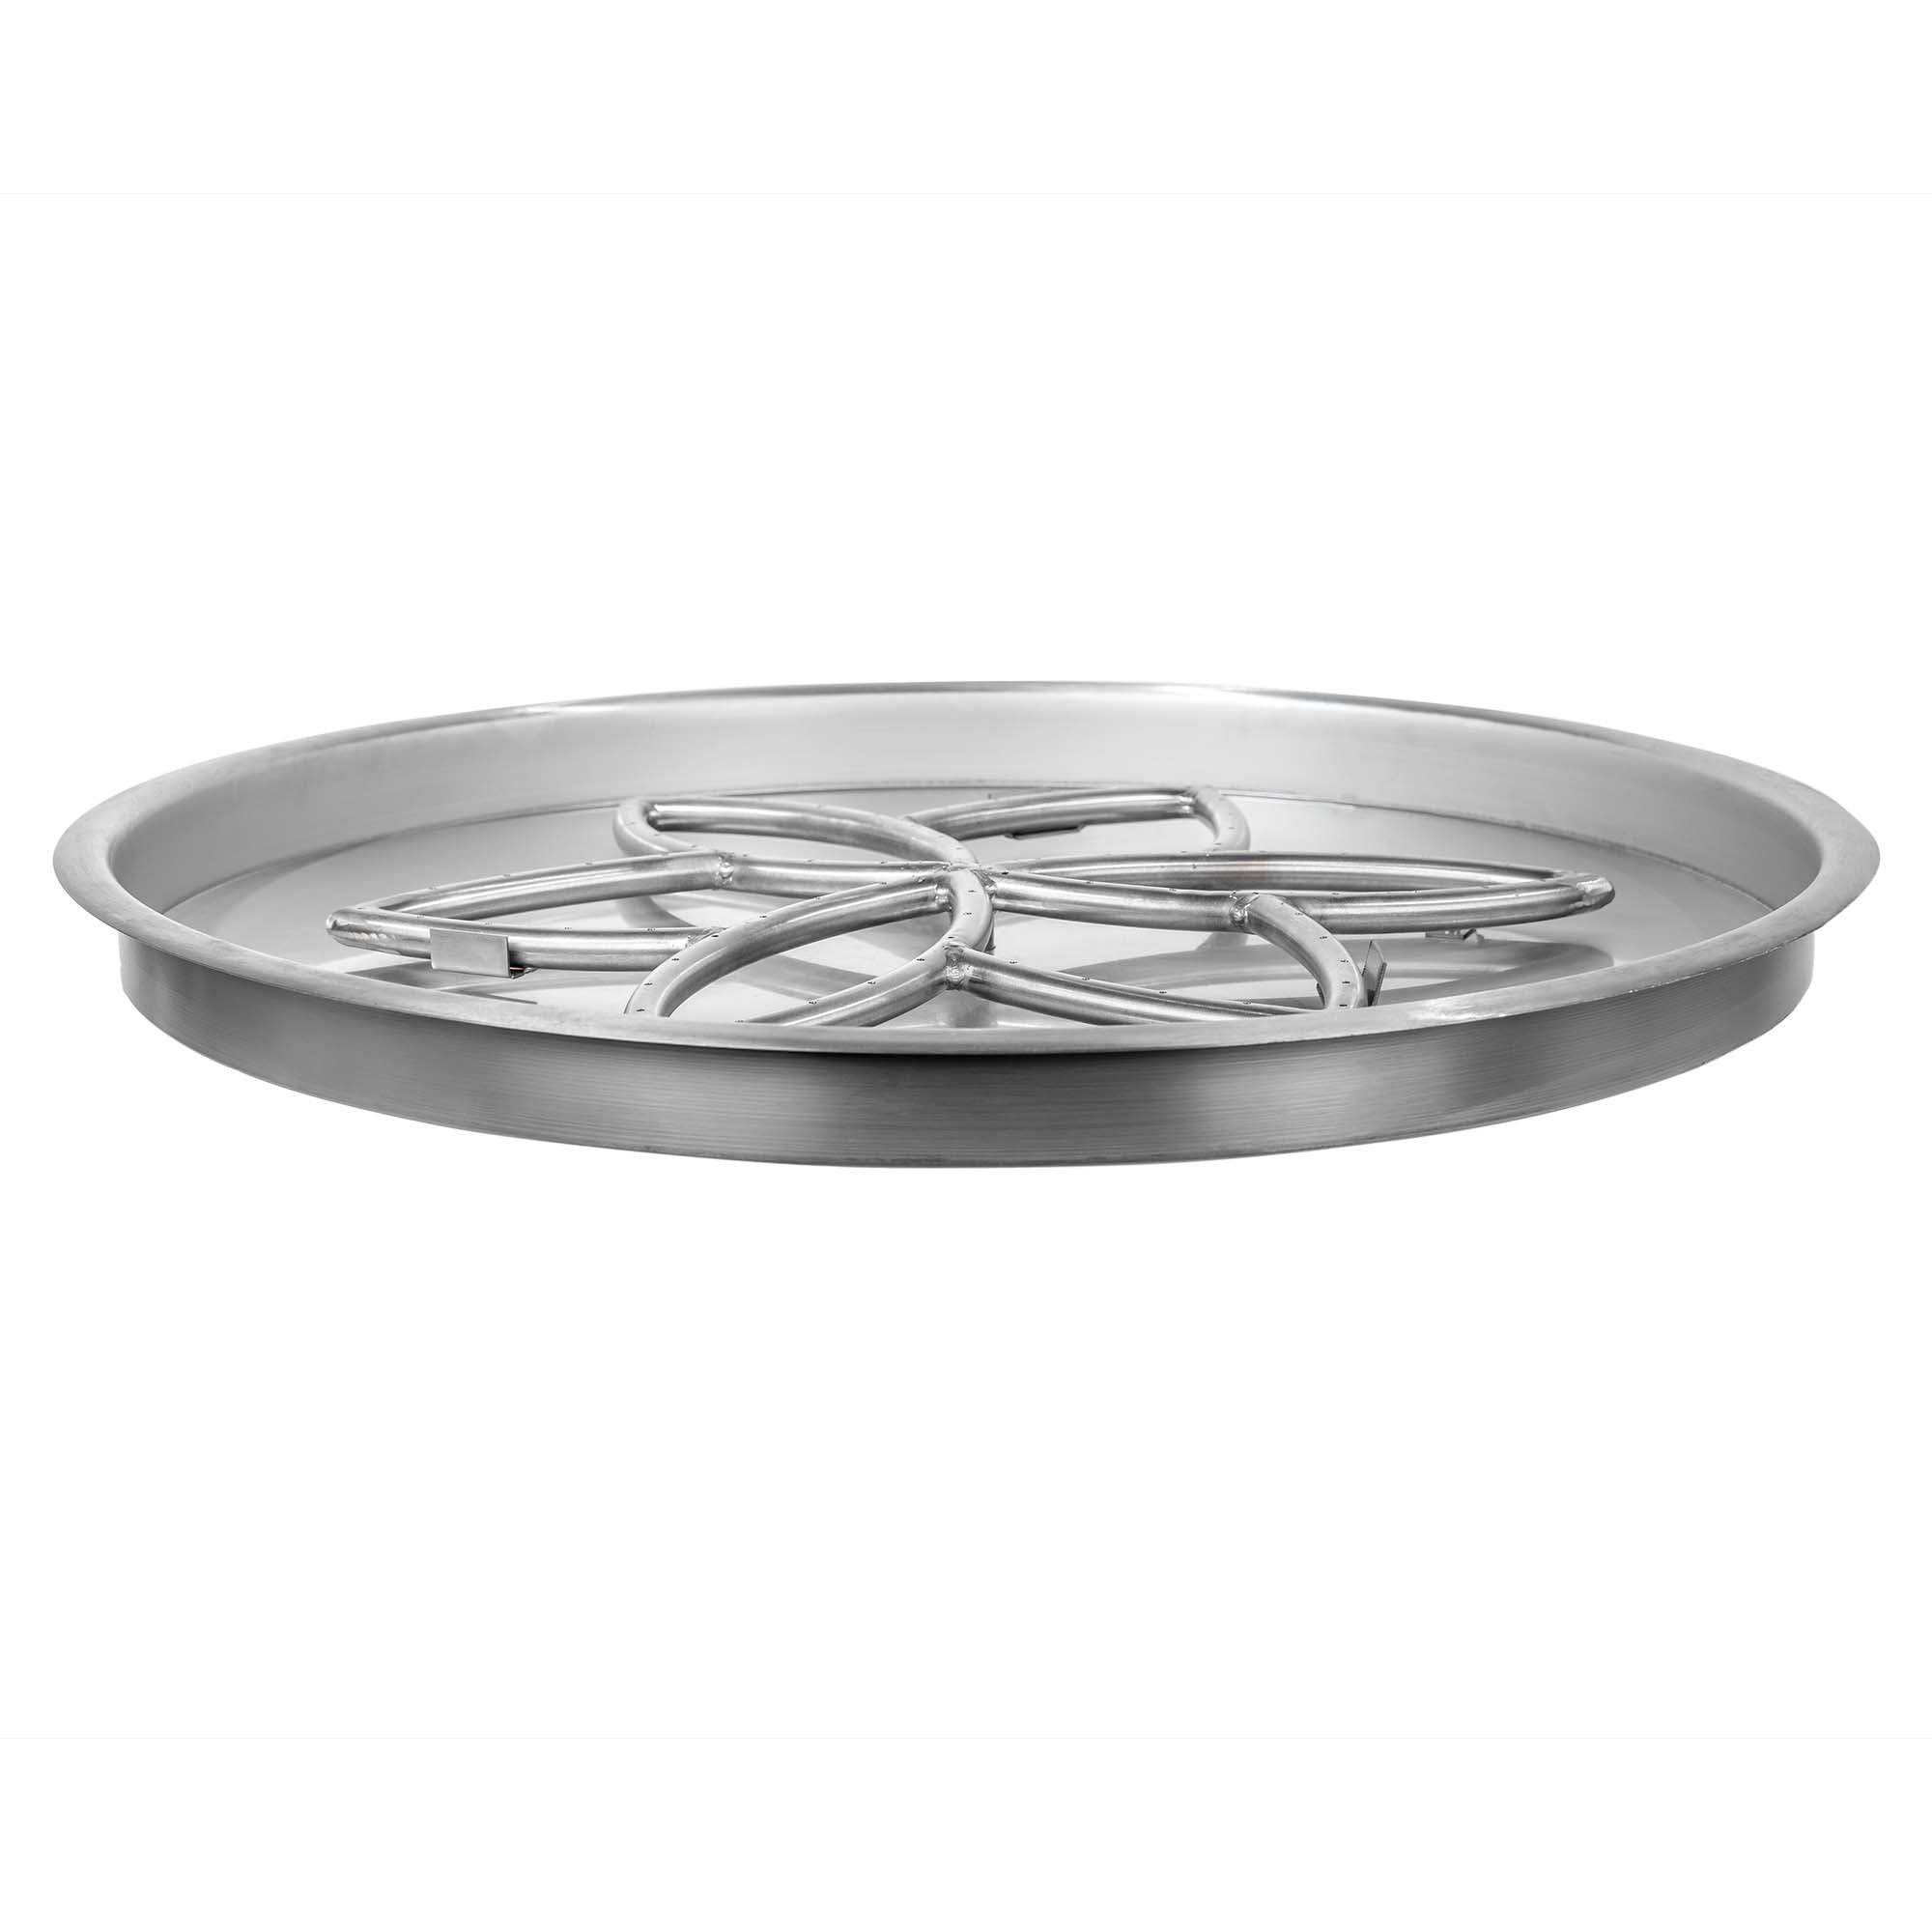 The Outdoor Plus Round Drop-in Pan with Stainless Steel Lotus Burner